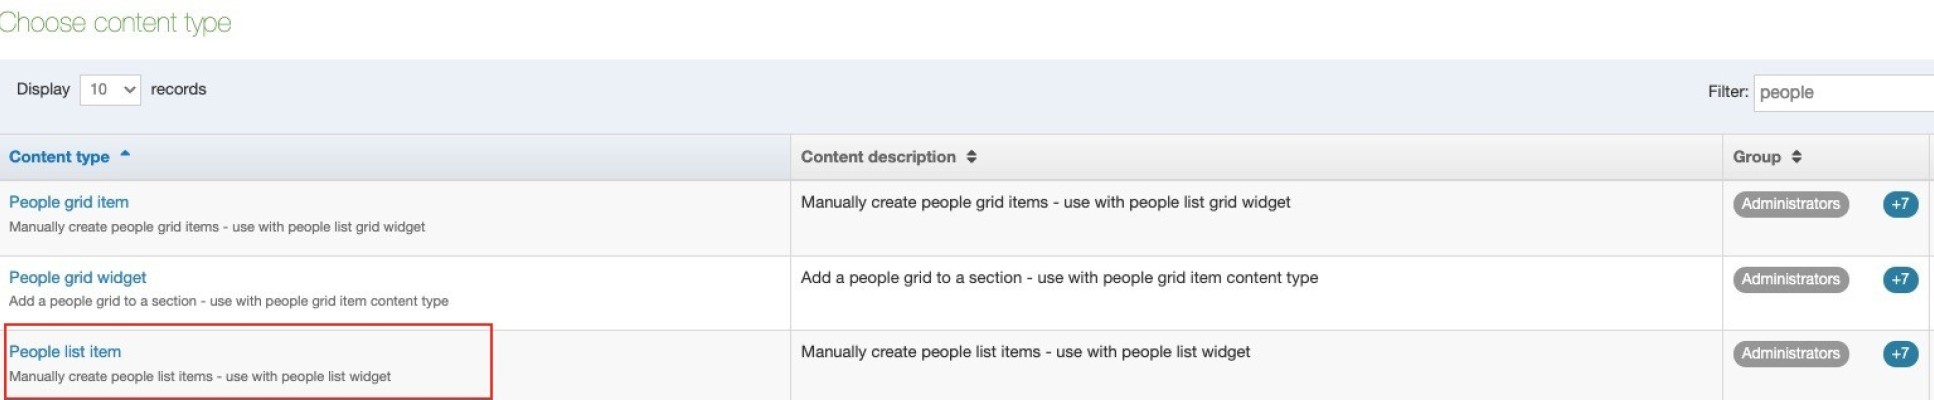 People list item in the content type list